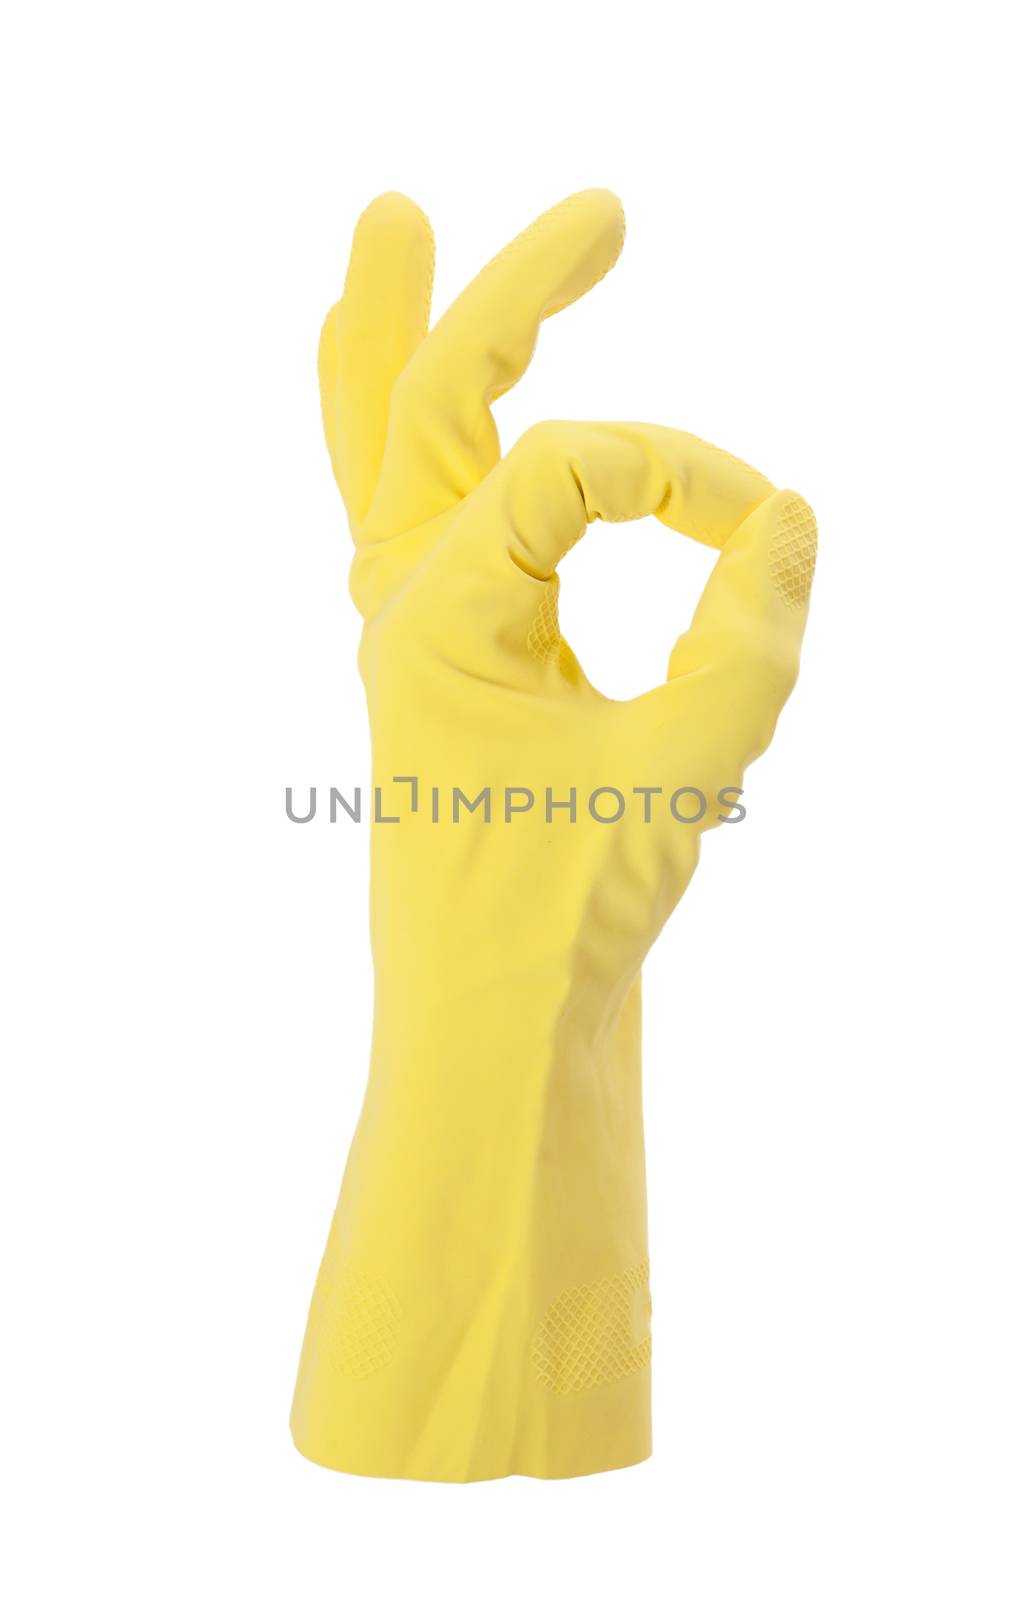 Hand gesturing with yellow cleaning product glove by michaklootwijk